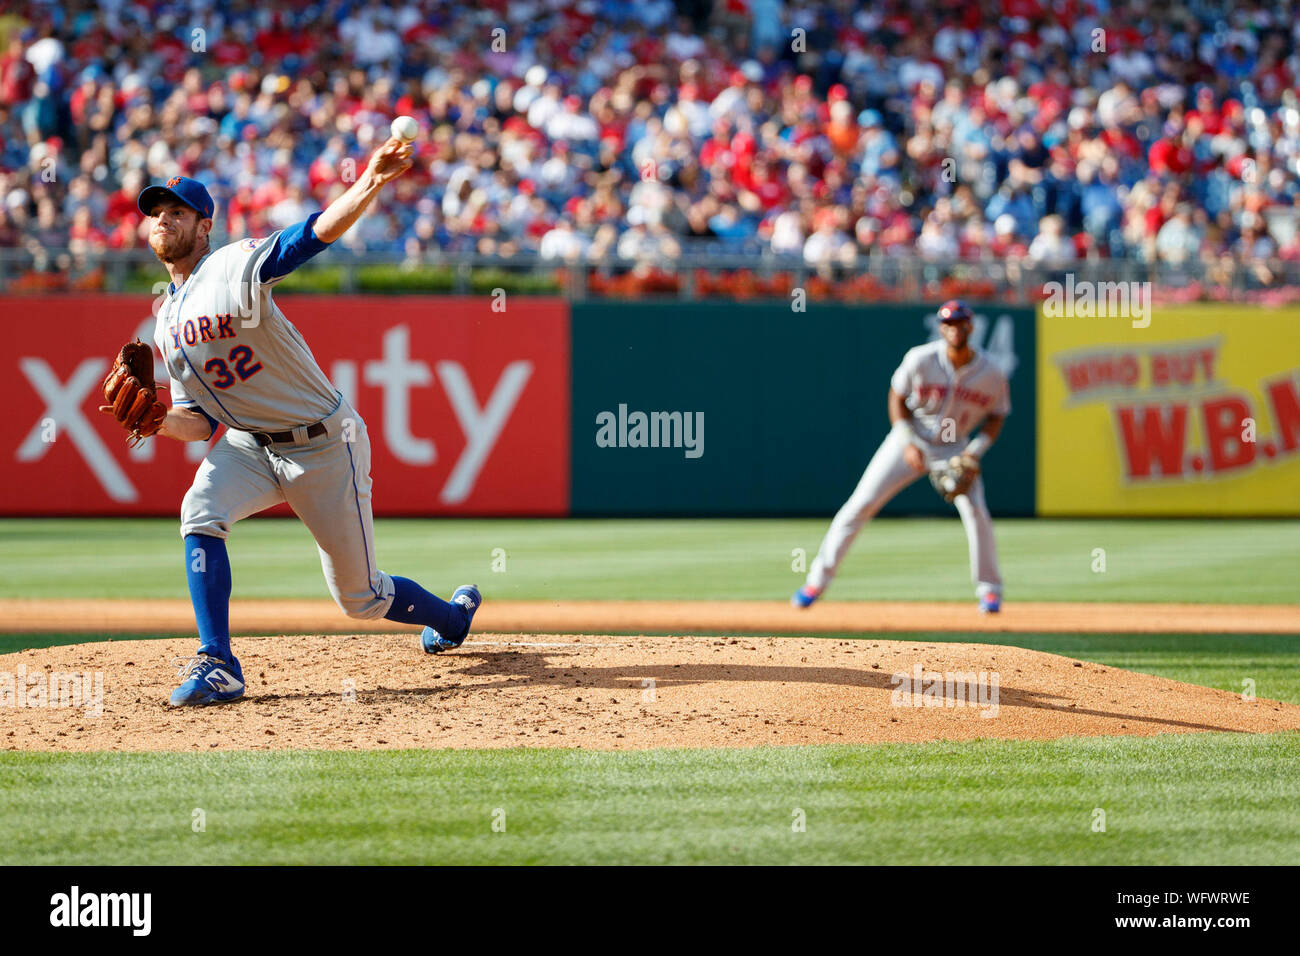 Philadelphia, USA. 31st Aug, 2019. August 31, 2019: Philadelphia Phillies  right fielder Bryce Harper (3) reacts to lining out during the MLB game  between the New York Mets and Philadelphia Phillies at